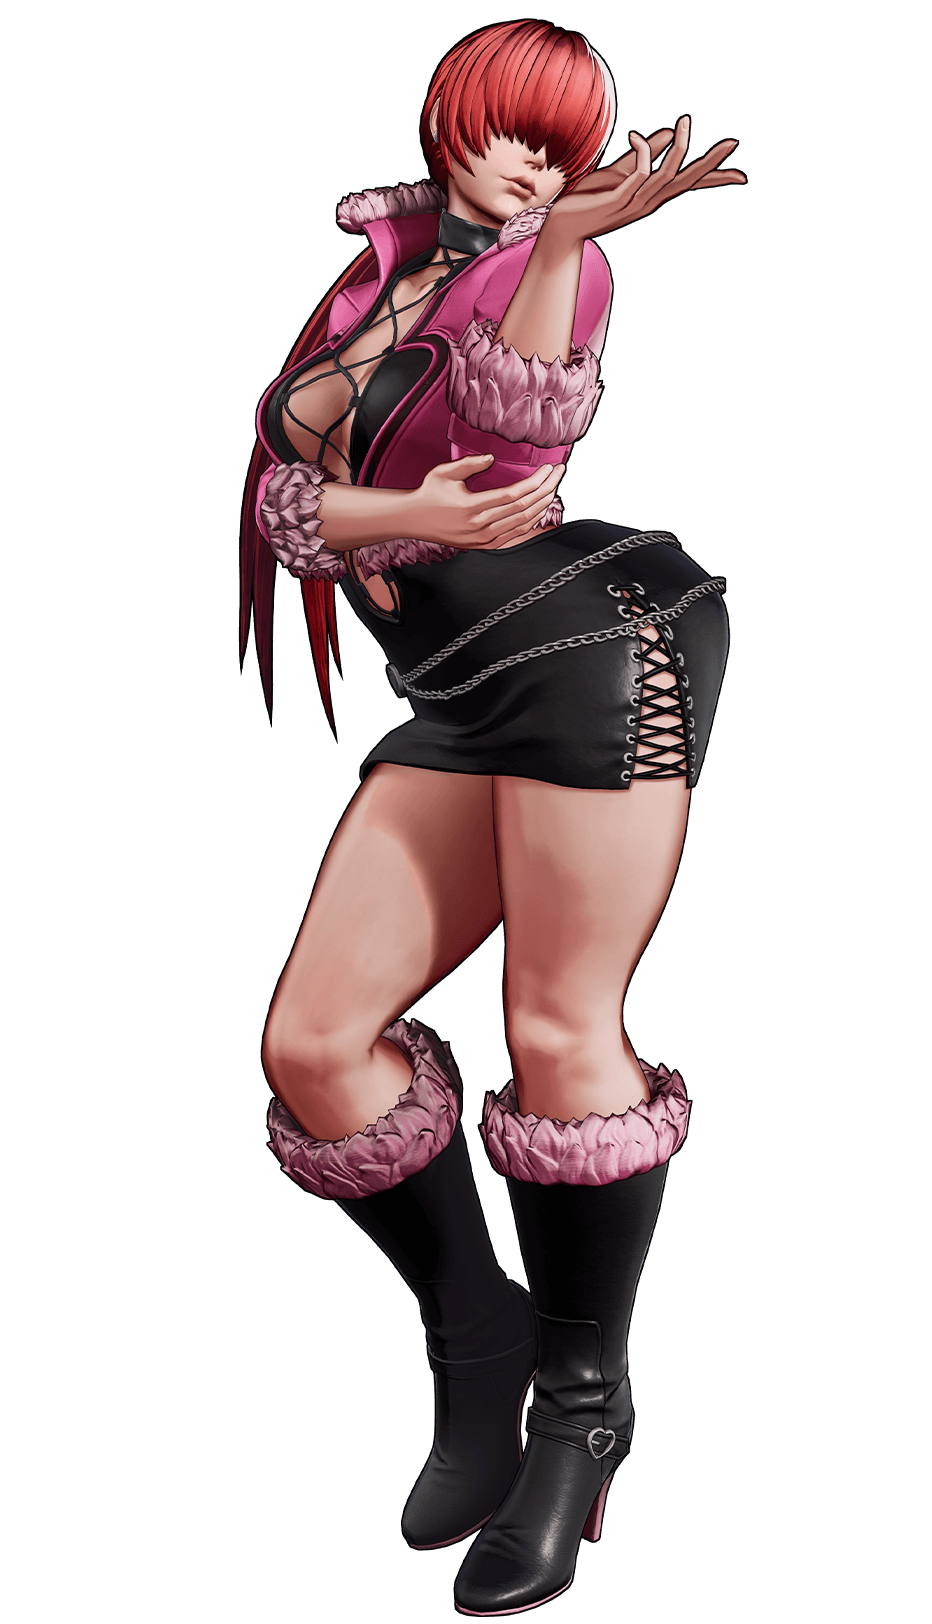 king of fighters female characters